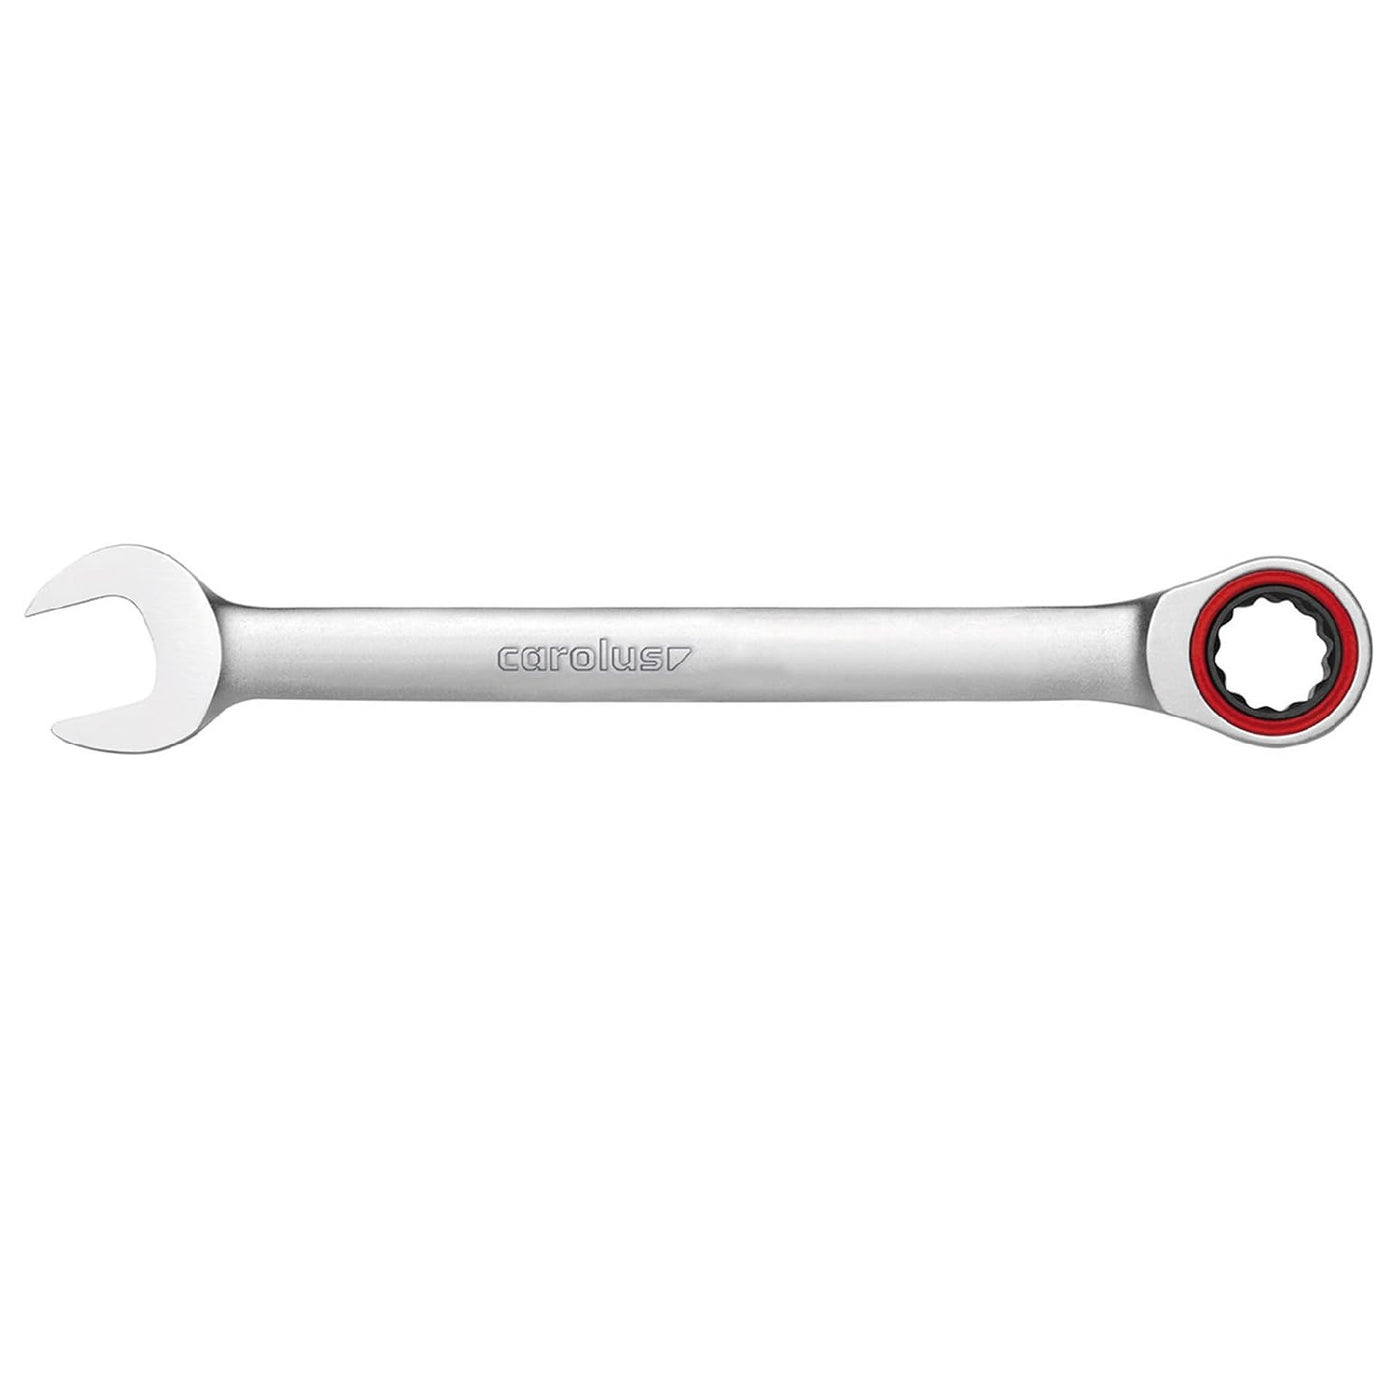 Gedore Carolus 2246775 Ratchet Wrench 13 mm